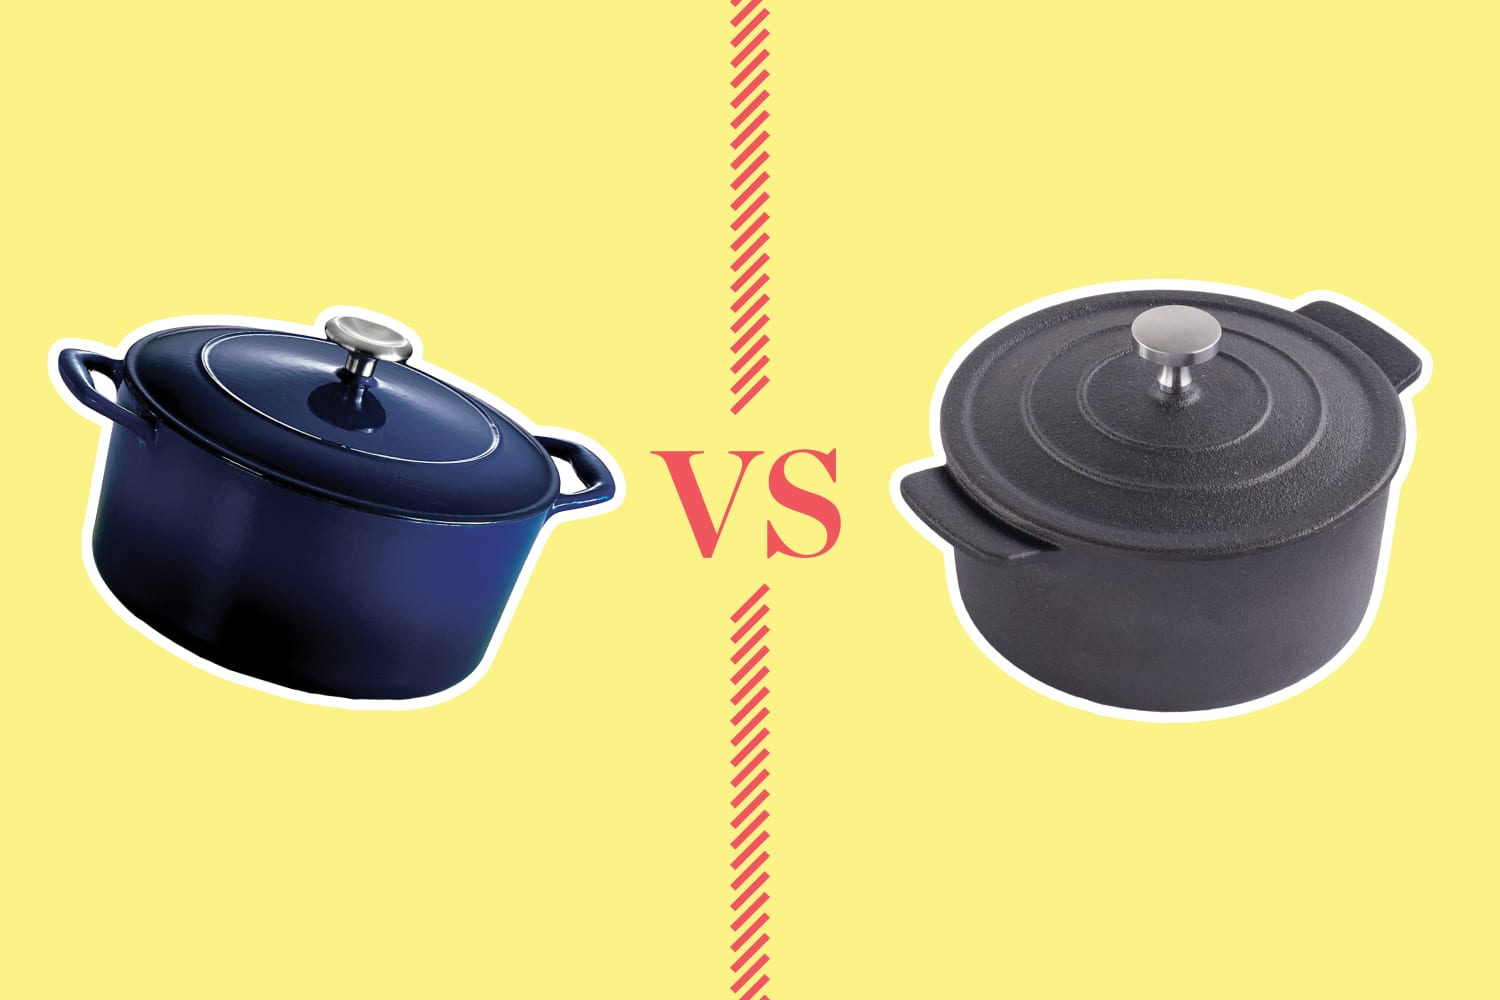 What Is The Difference Between A Dutch Oven And Double Dutch Oven